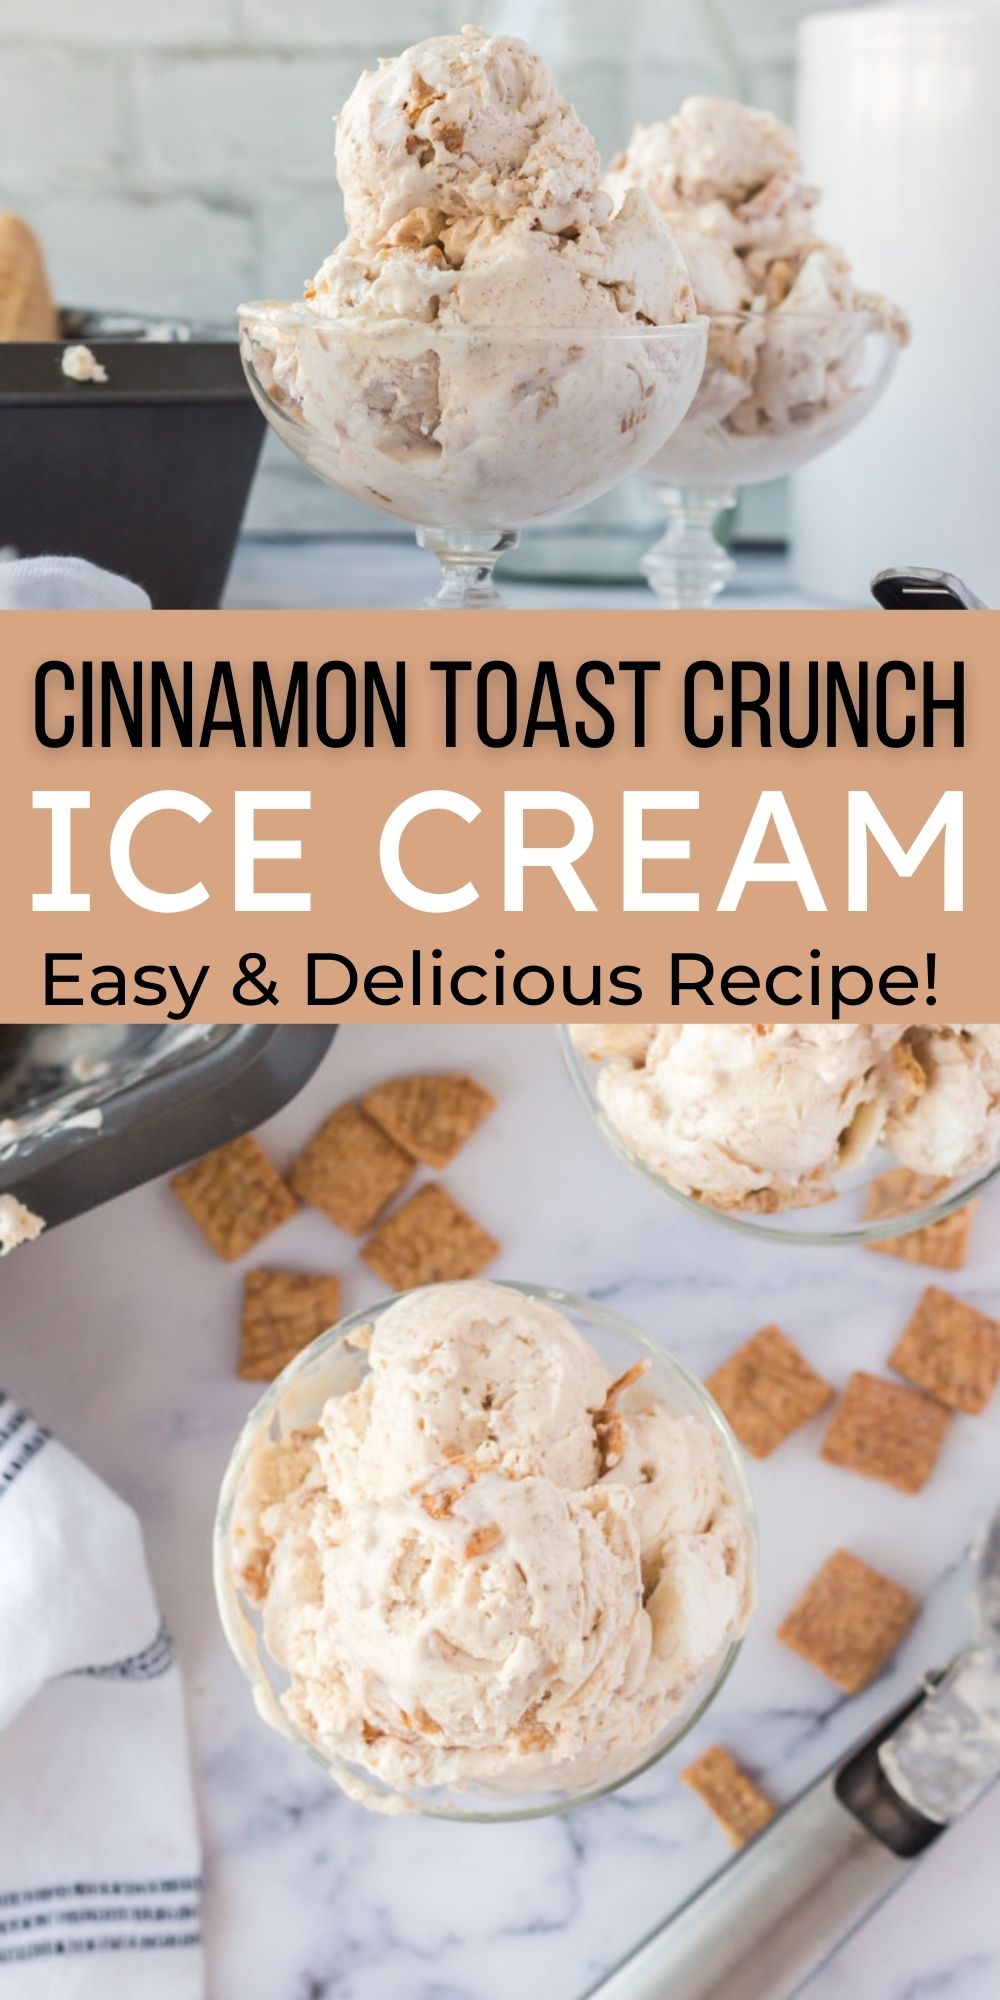 This Cinnamon Toast Crunch ice cream recipe is easy to make with cereal, heavy whipping cream and sweetened condensed milk.  You will love this easy homemade, no churn ice cream recipe that the entire family will love.  This is an easy and delicious cinnamon dessert recipe.  #dessertsonadime #icecreamrecipes #easydesserts #cinnamondesserts 
